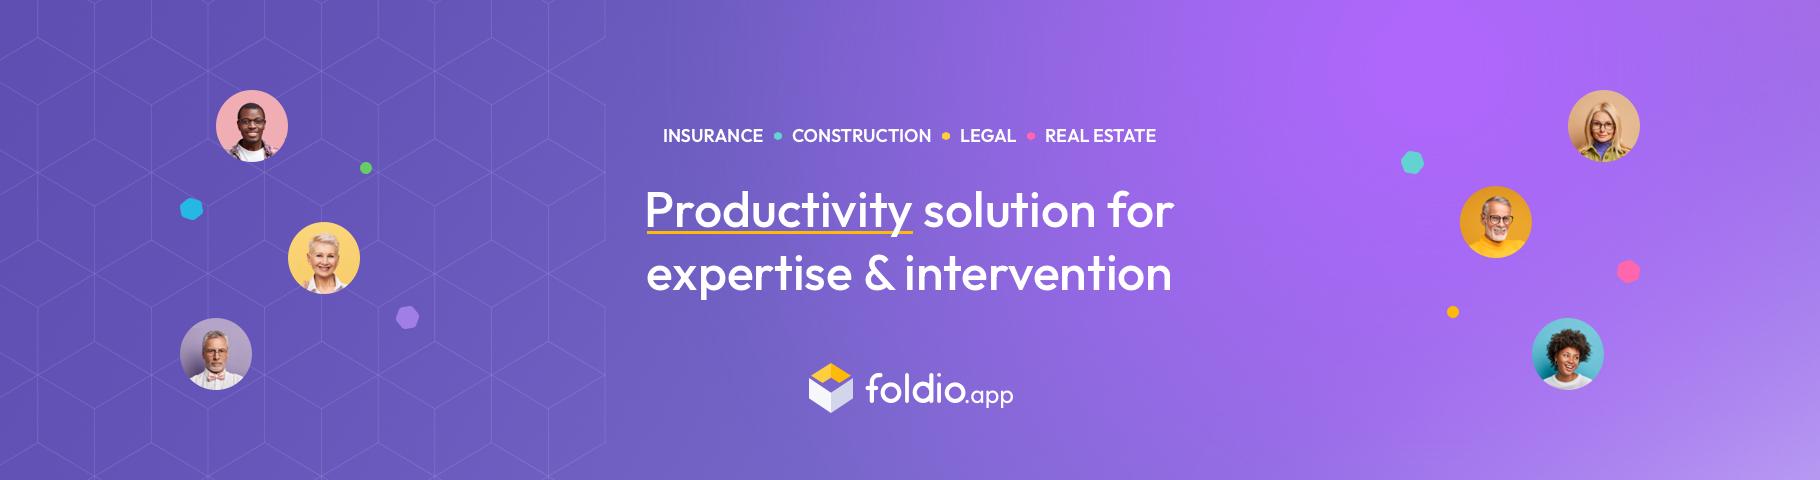 Review Foldio: Productivity solution for expertise and intervention - Appvizer